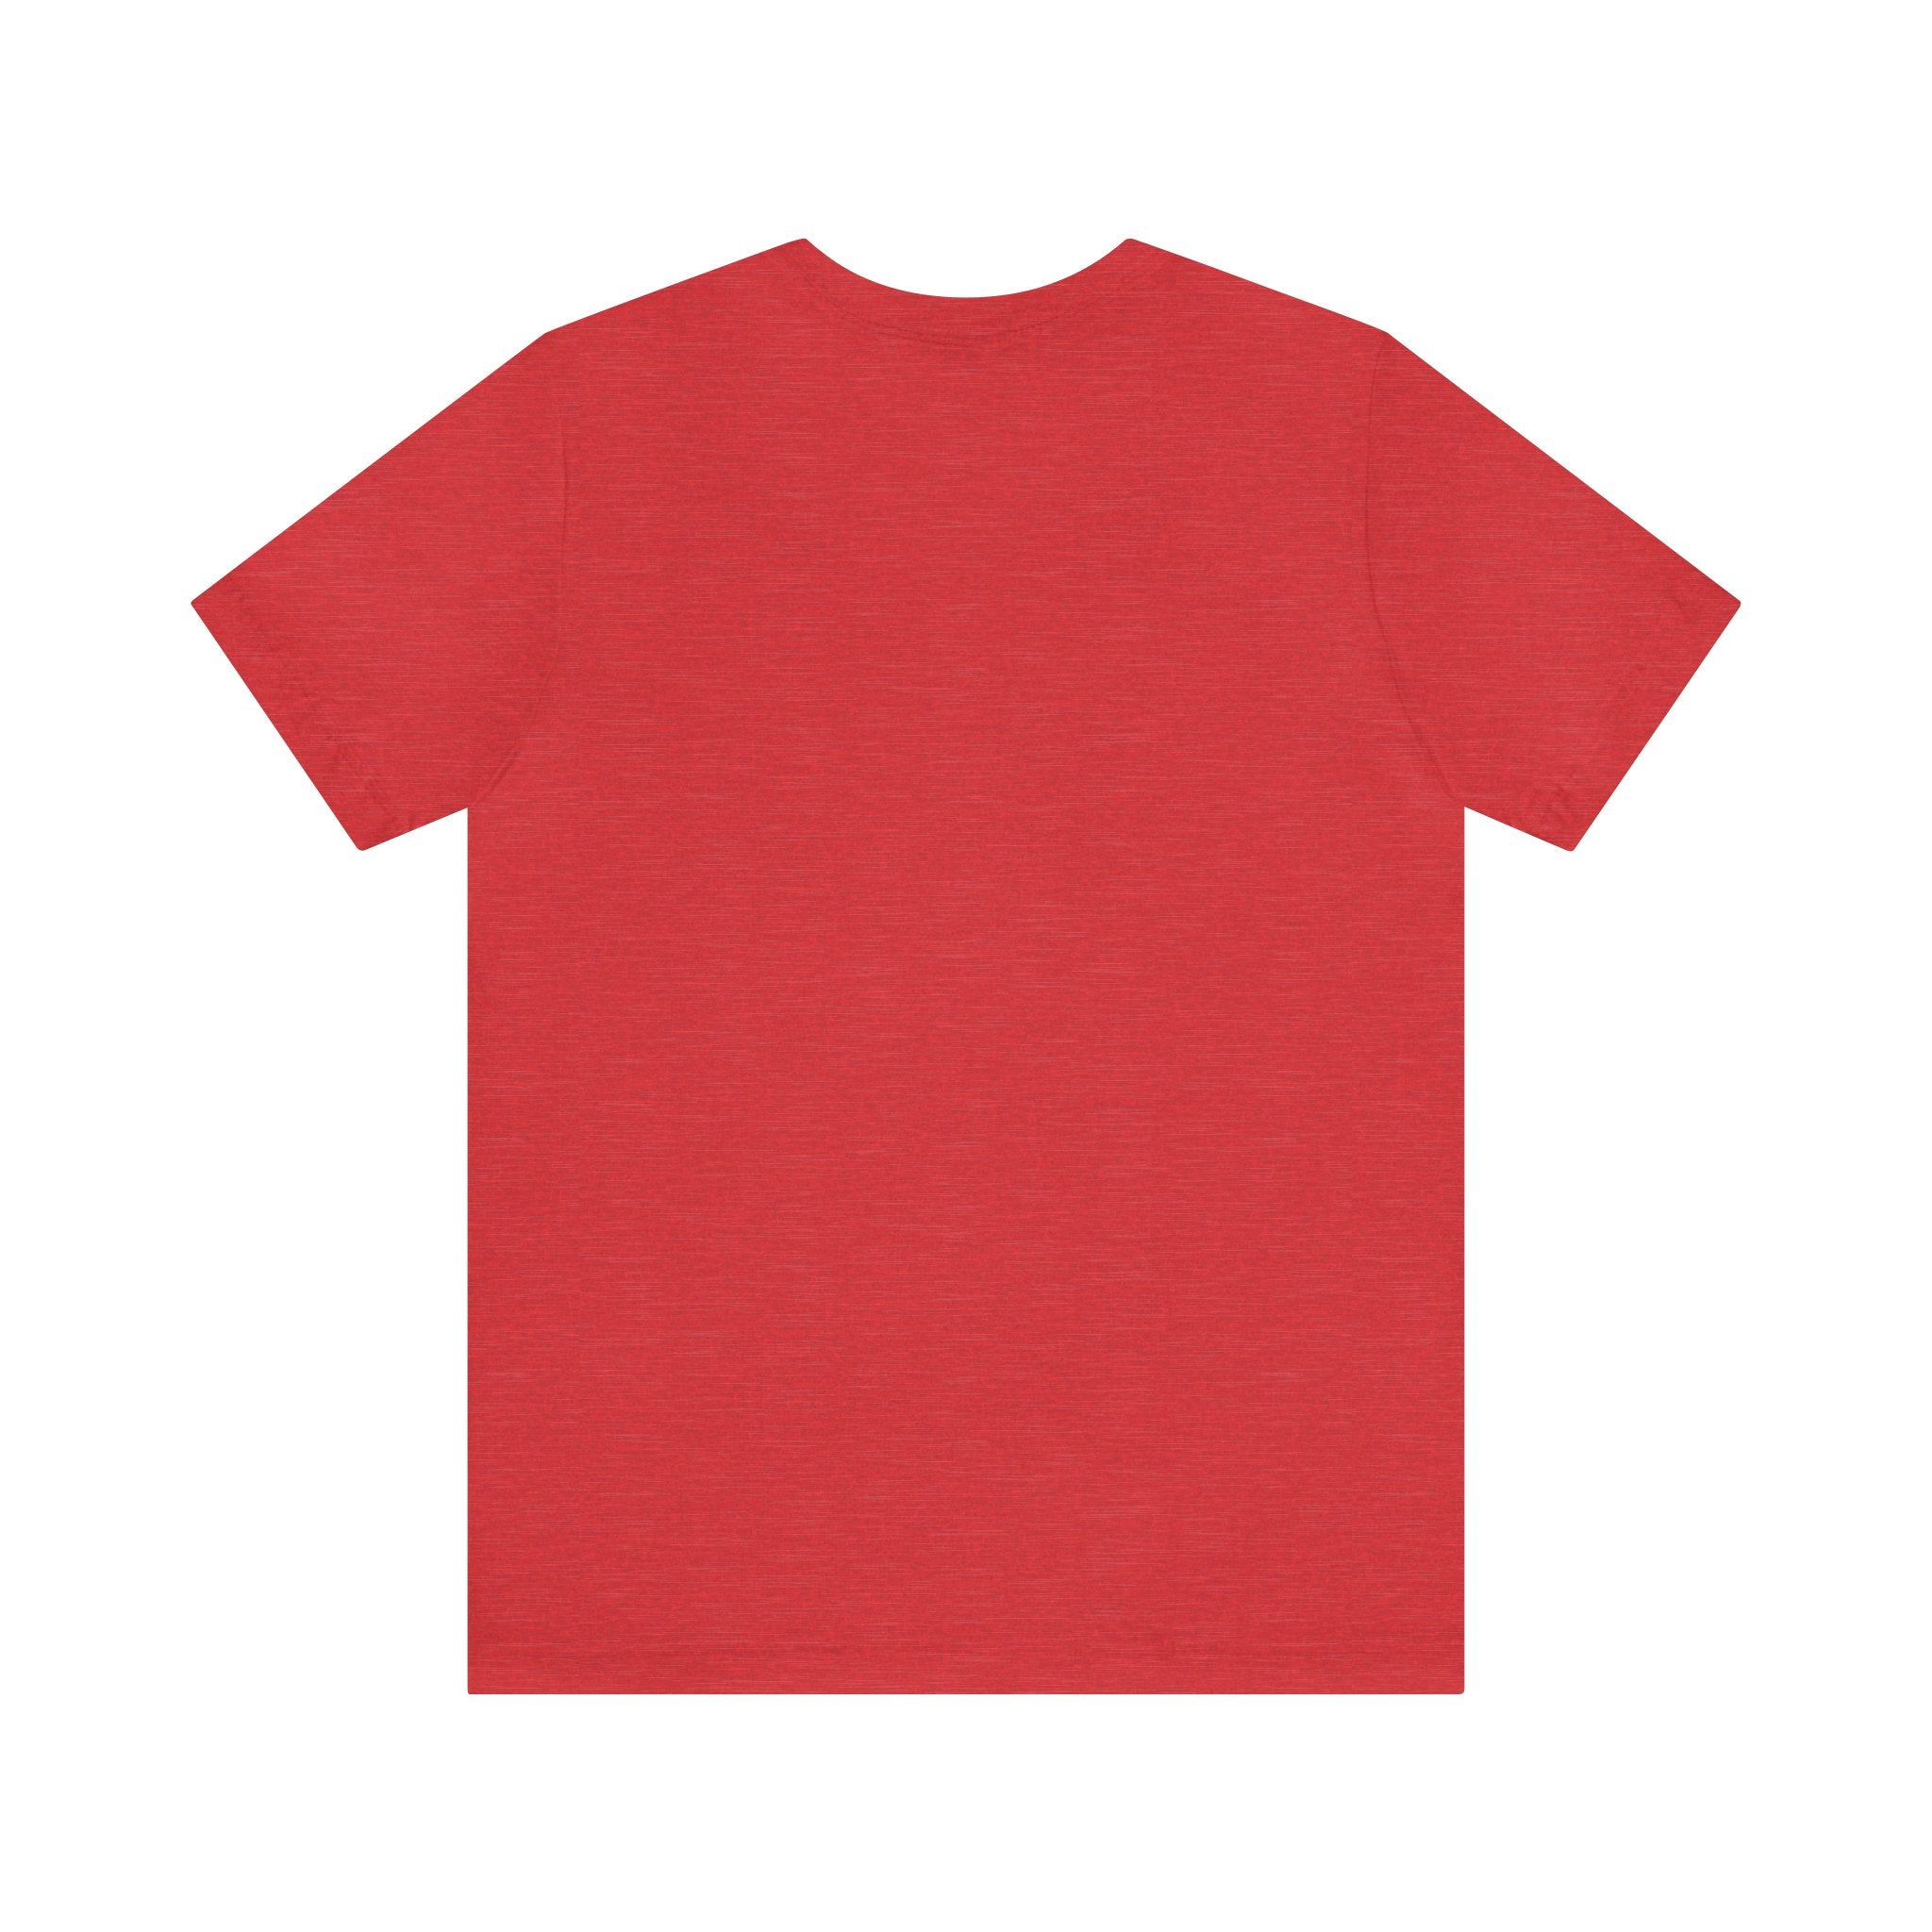 A brilliant red "You Are Special" t-shirt on a white background.